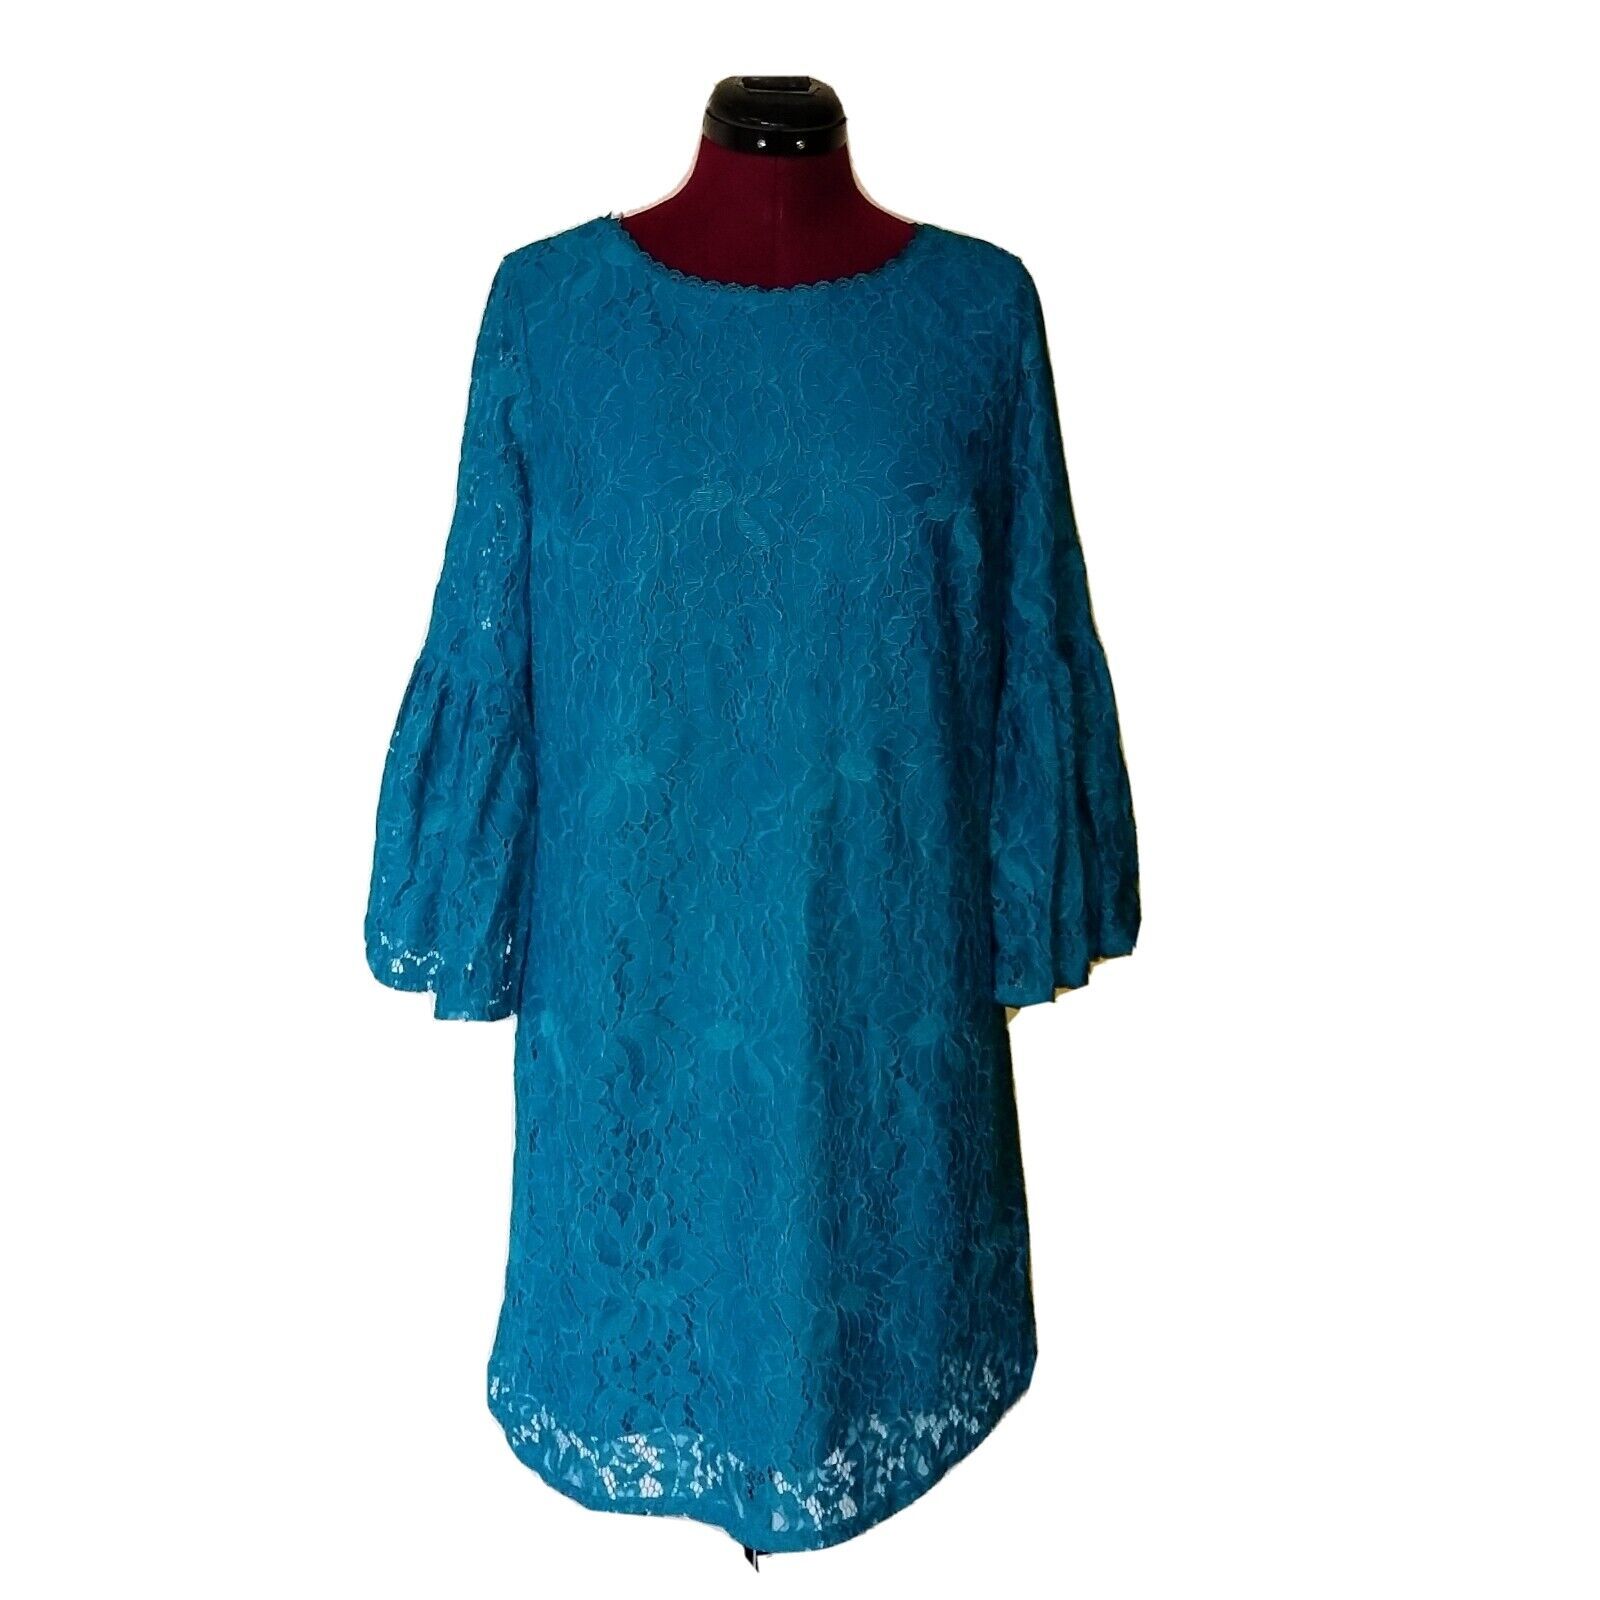 Primary image for Laundry By Shelli Segal Dress Sheer Lace V Back Bell Sleeves Lined Teal Size 8P